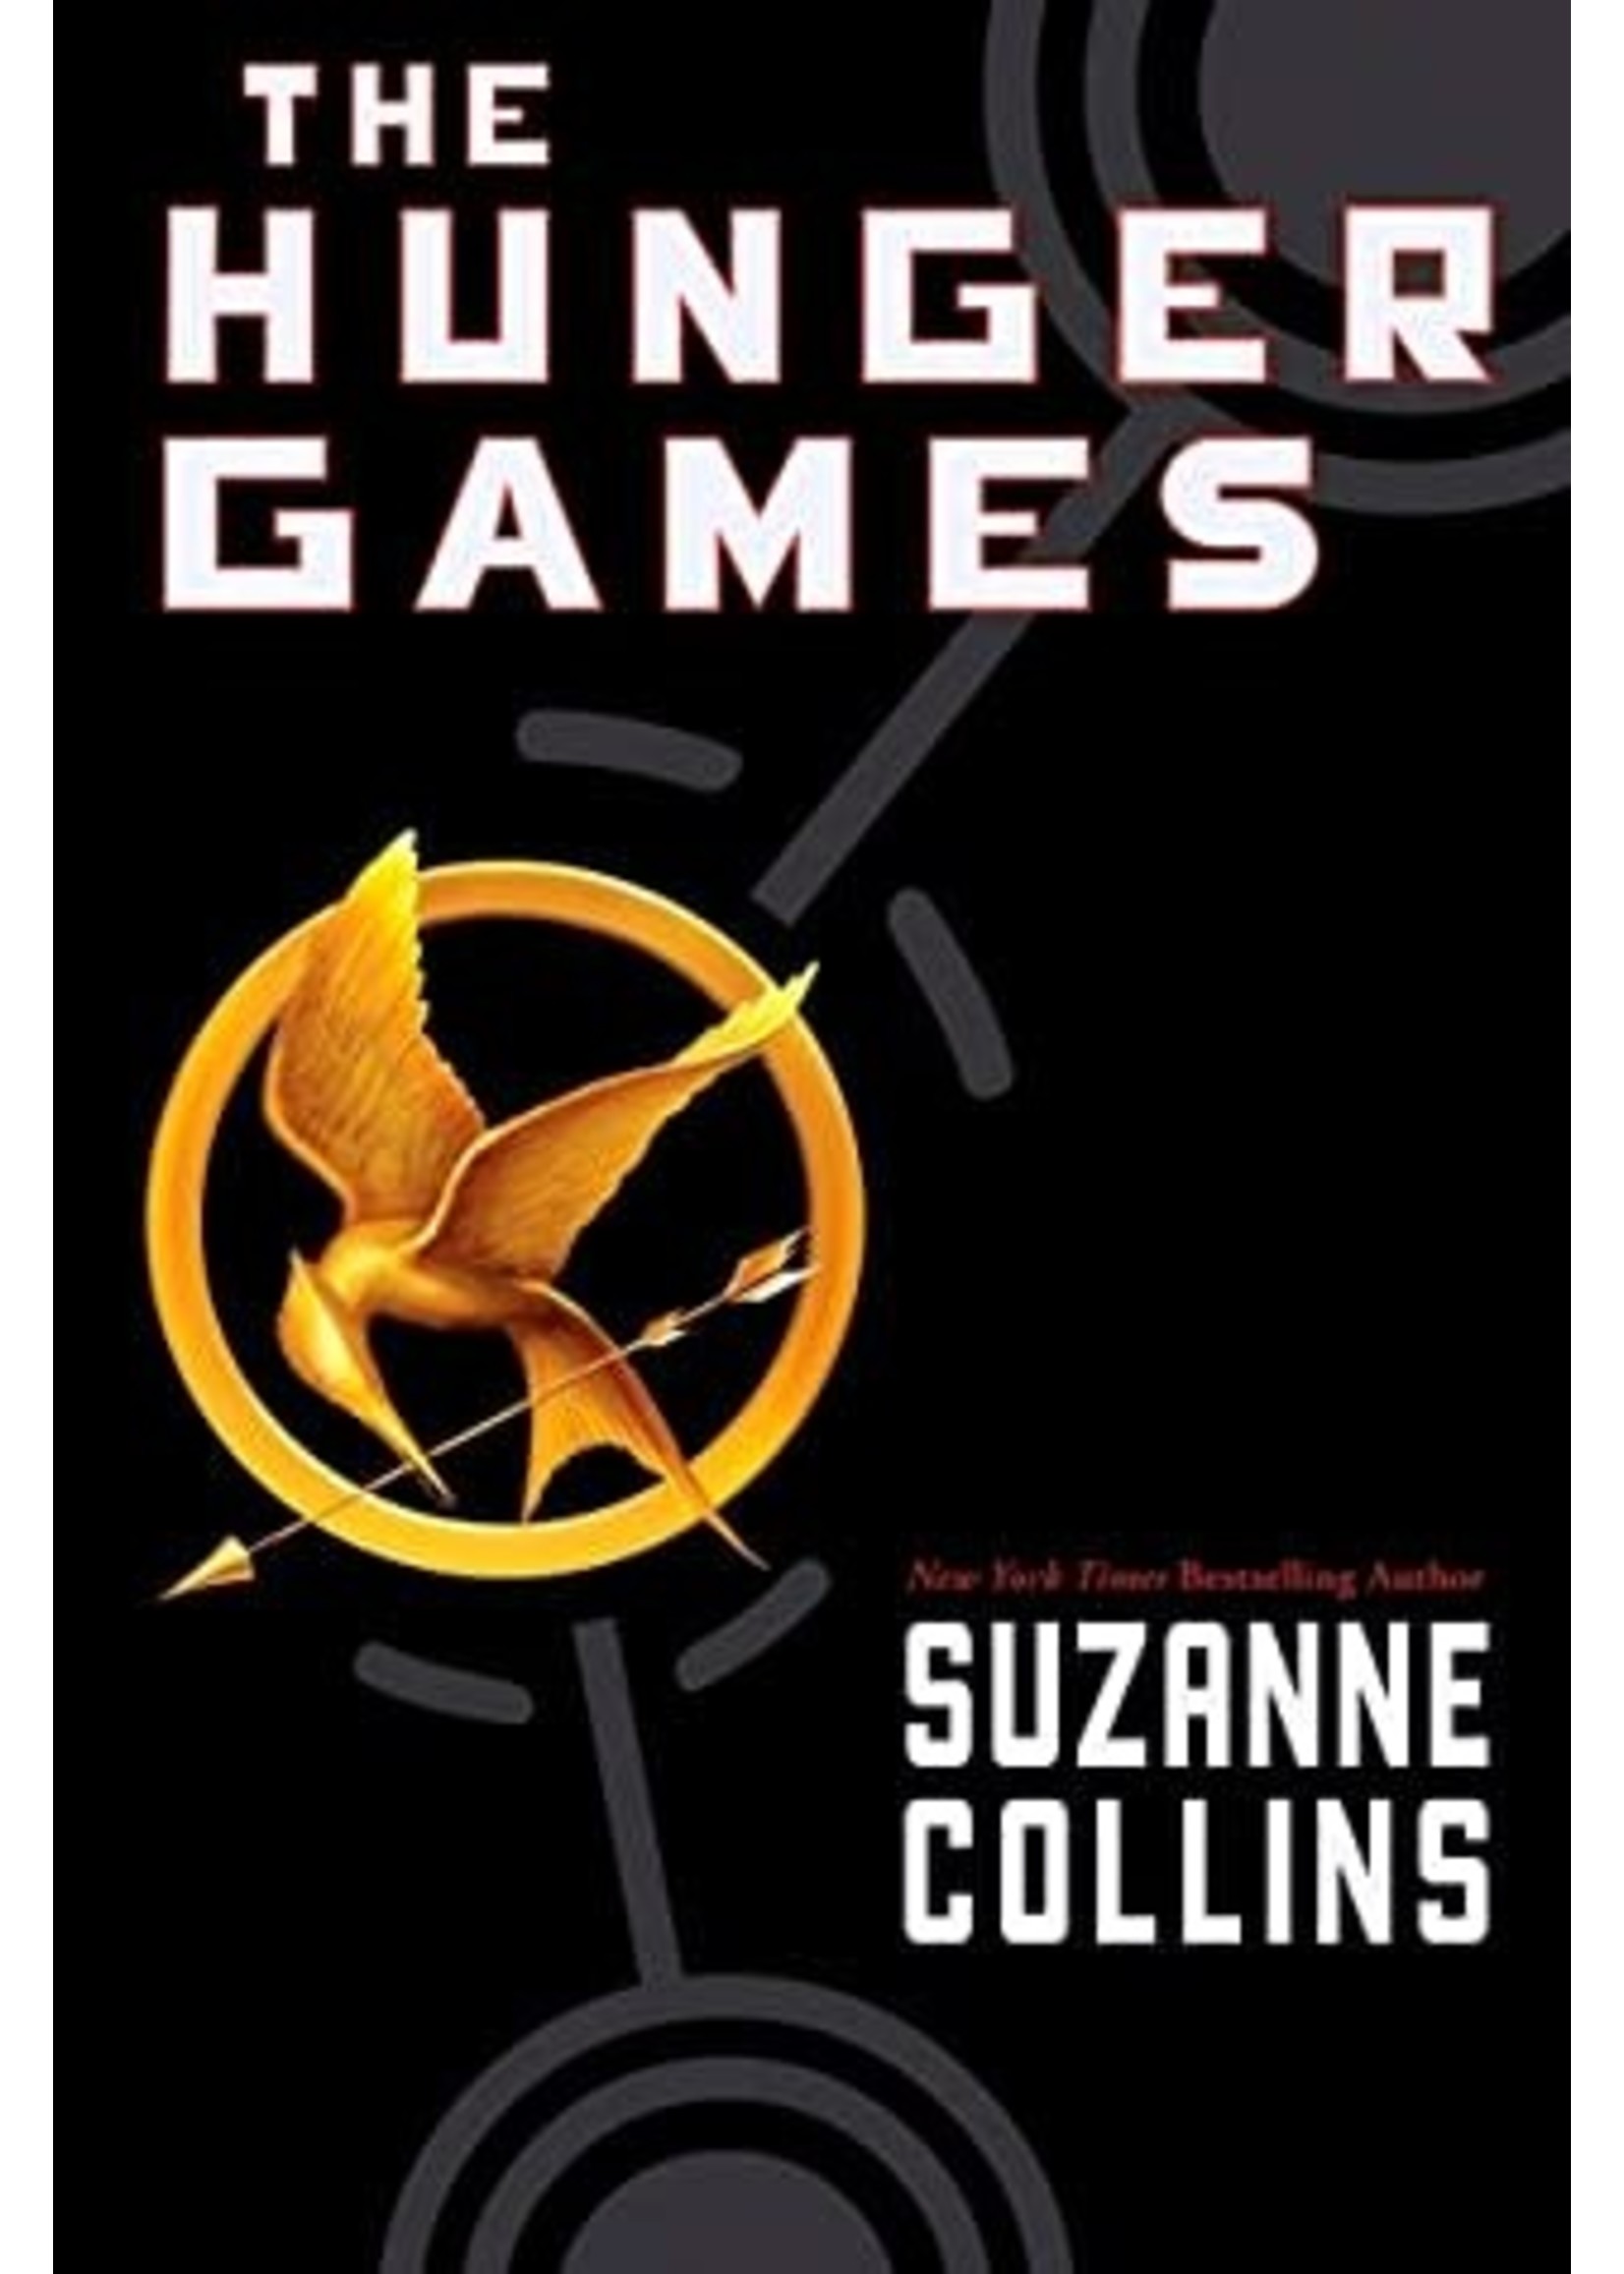 The Hunger Games (The Hunger Games #1) by Suzanne Collins